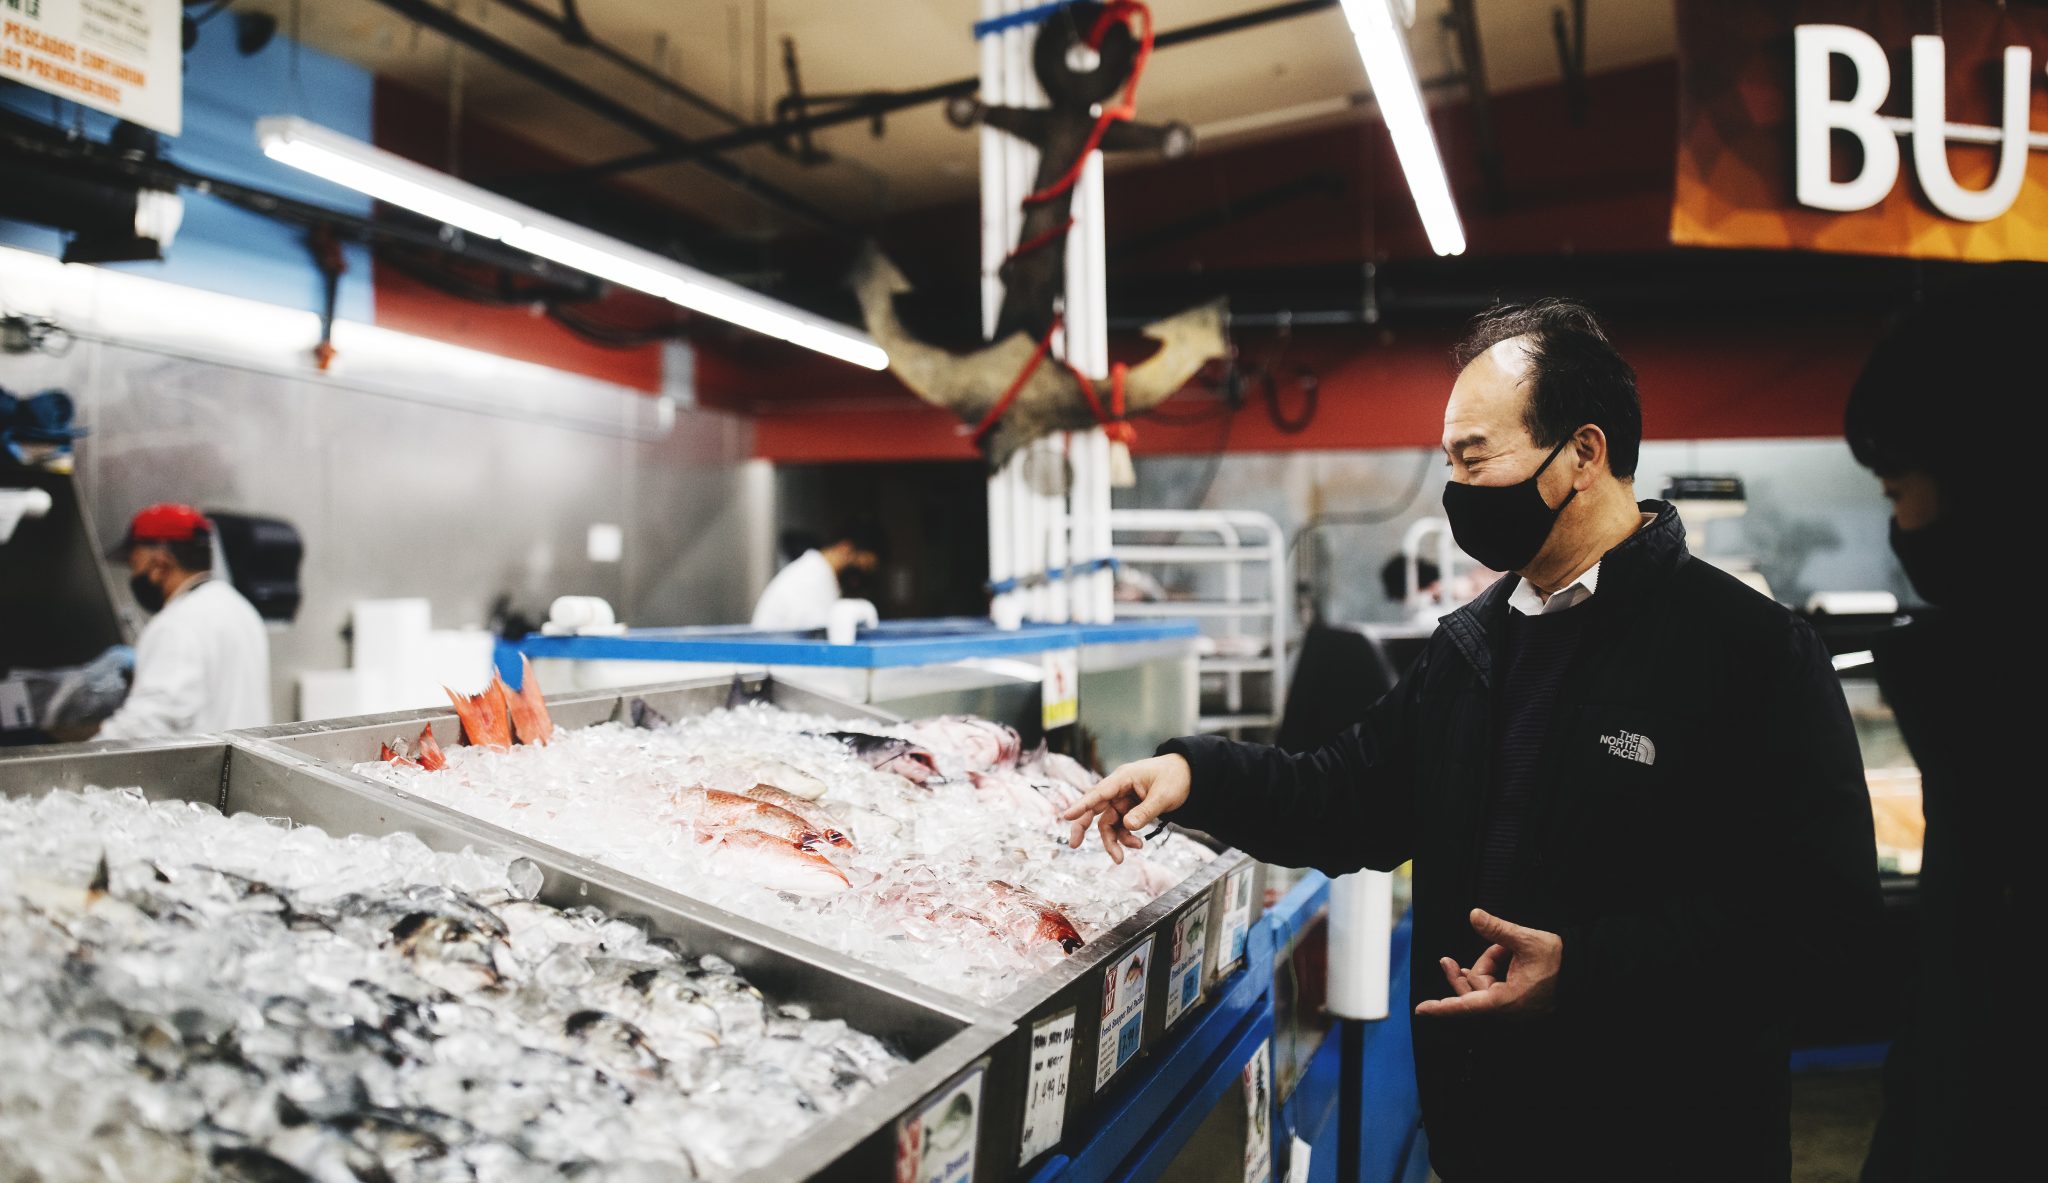 Man stands over fish at local supermarket in Renton, Washington.